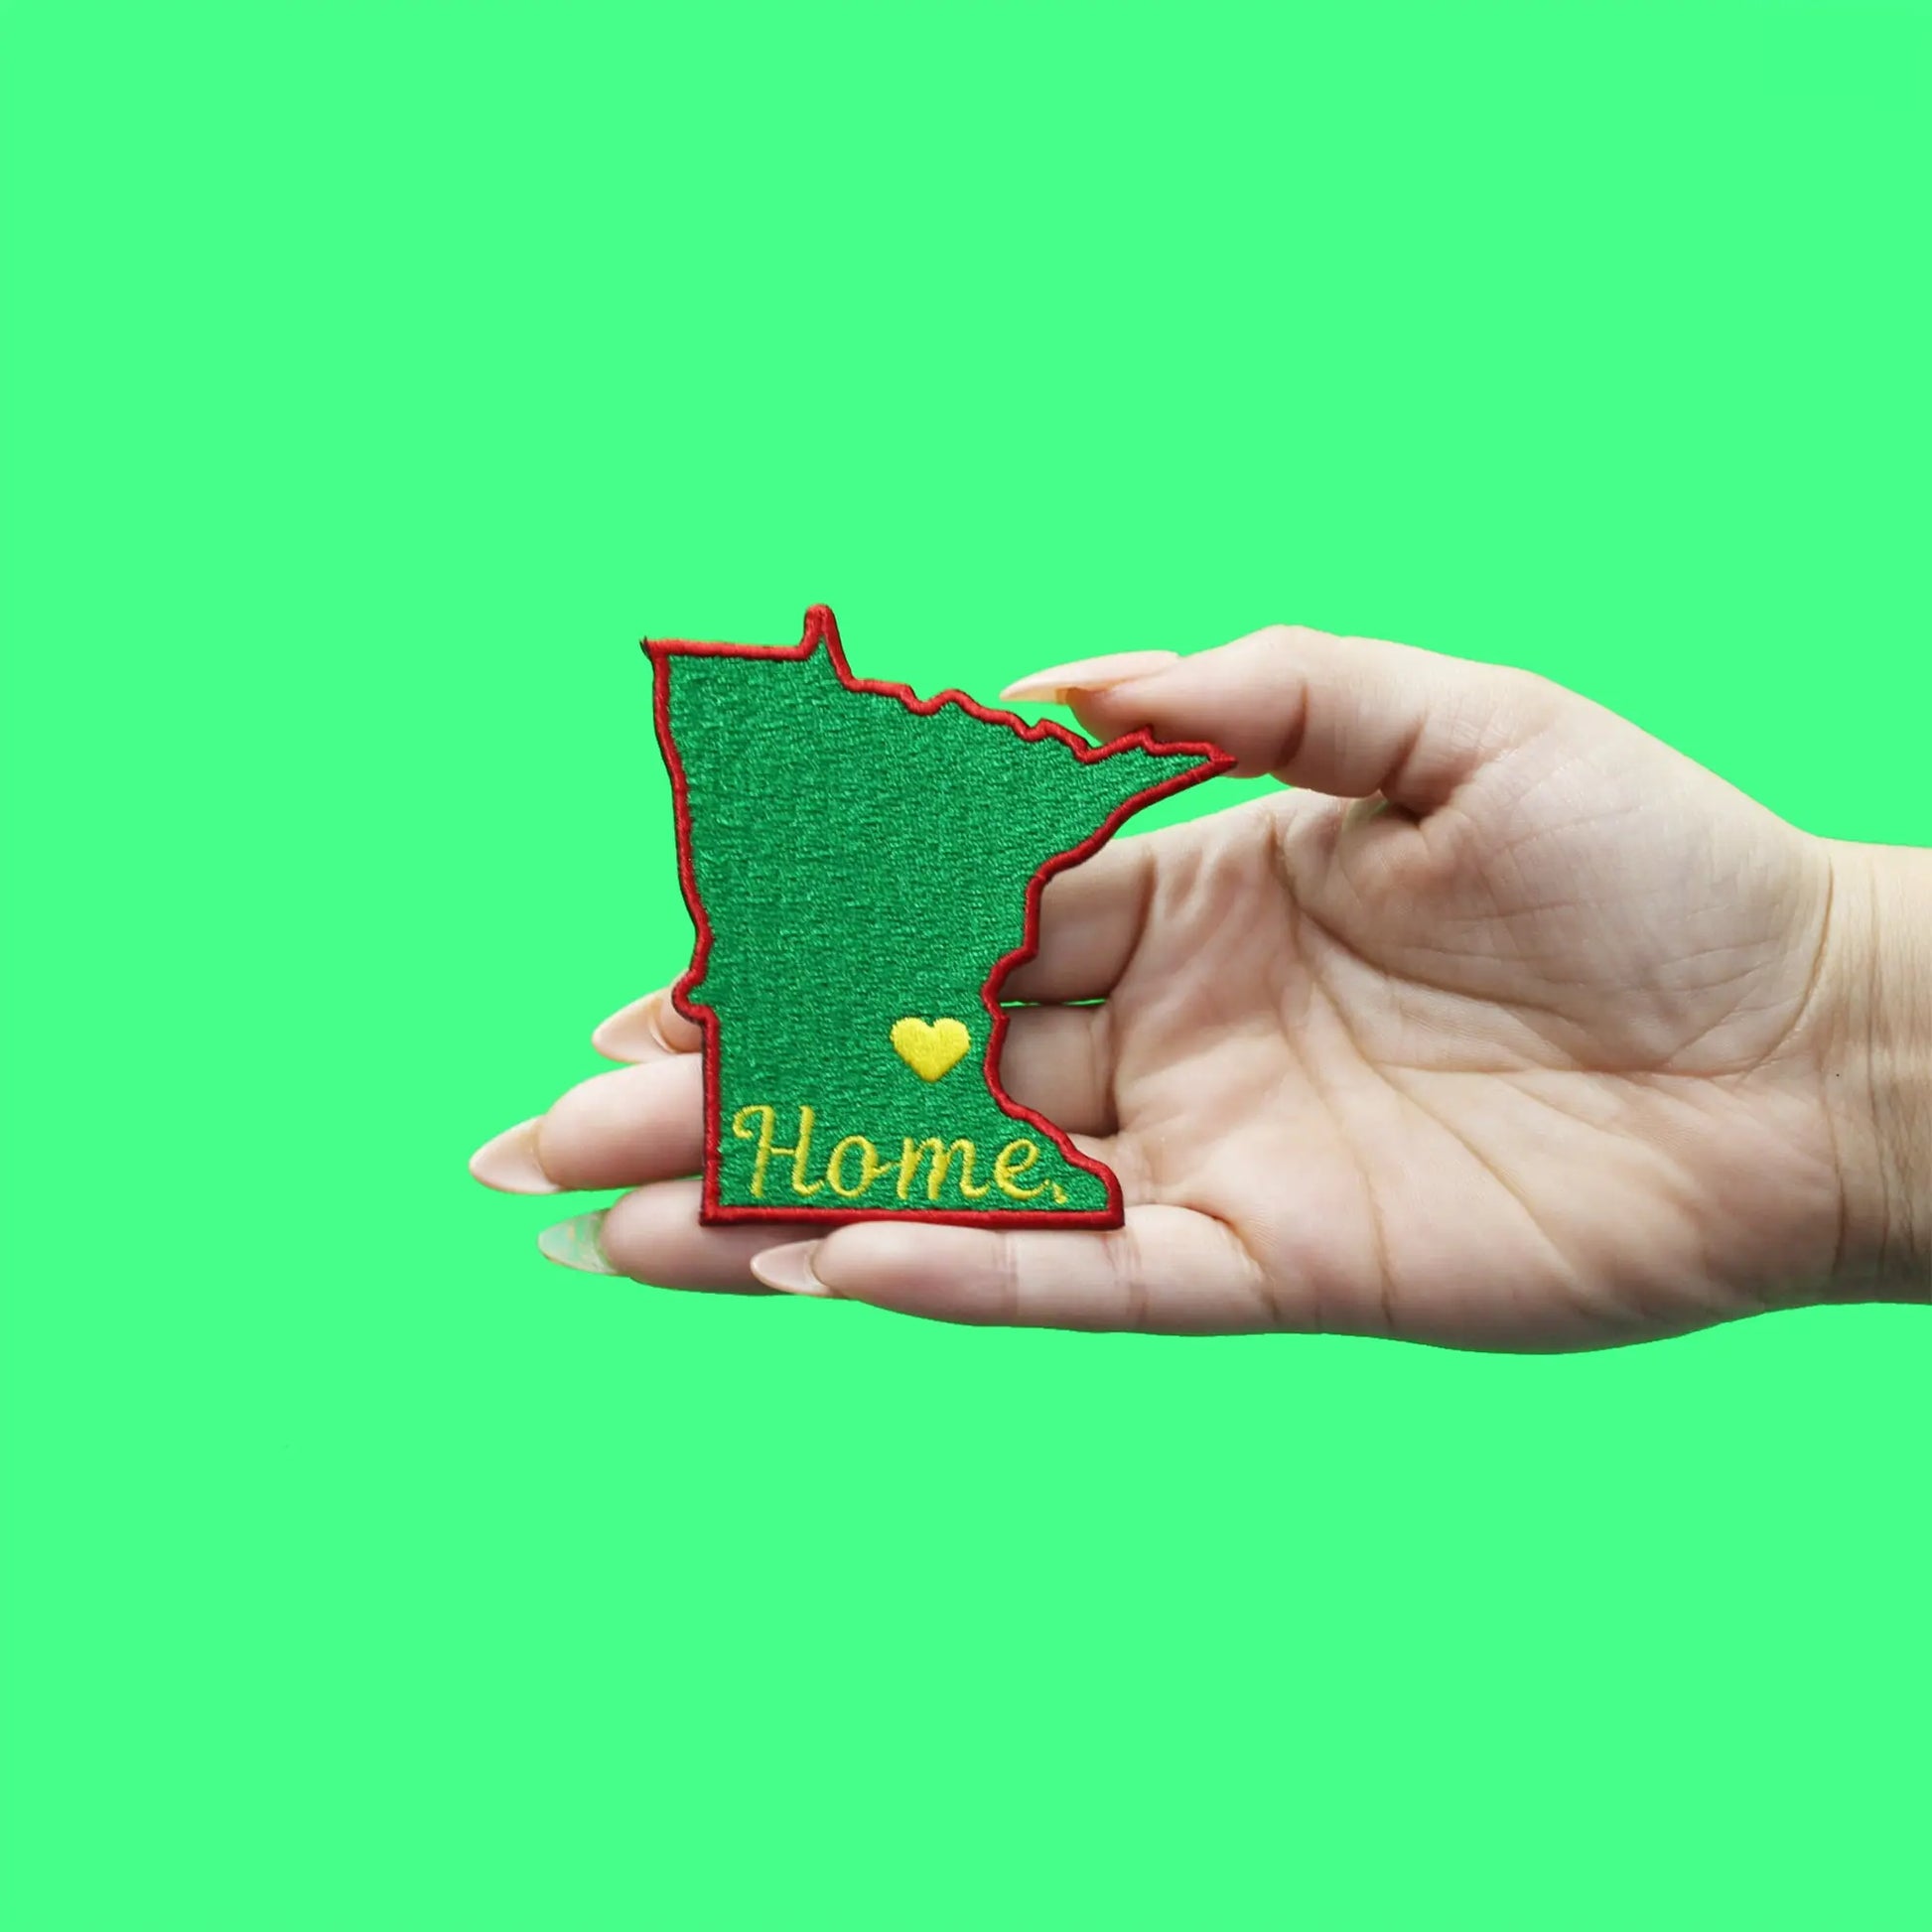 Minnesota Home State Patch Hockey Parody Embroidered Iron On - Green/Red 